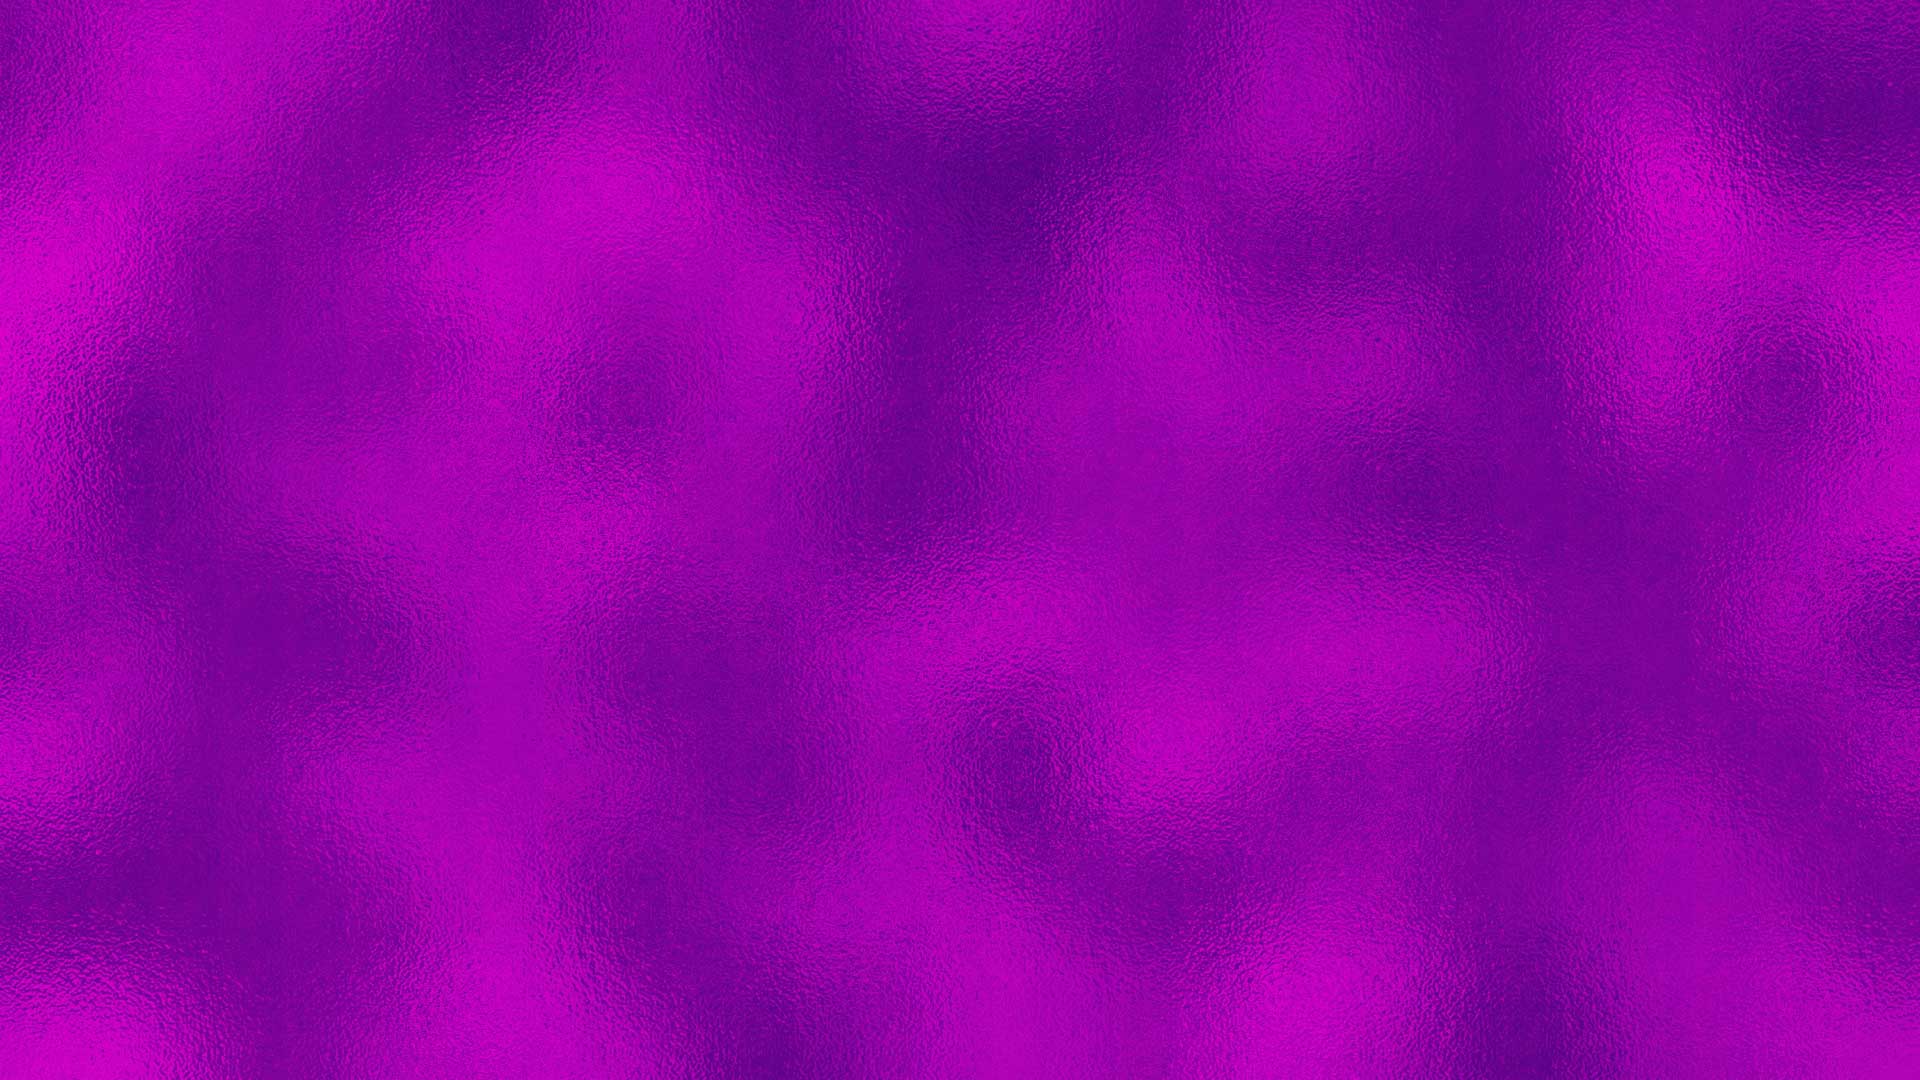 Gallery For gt Pink And Purple Background